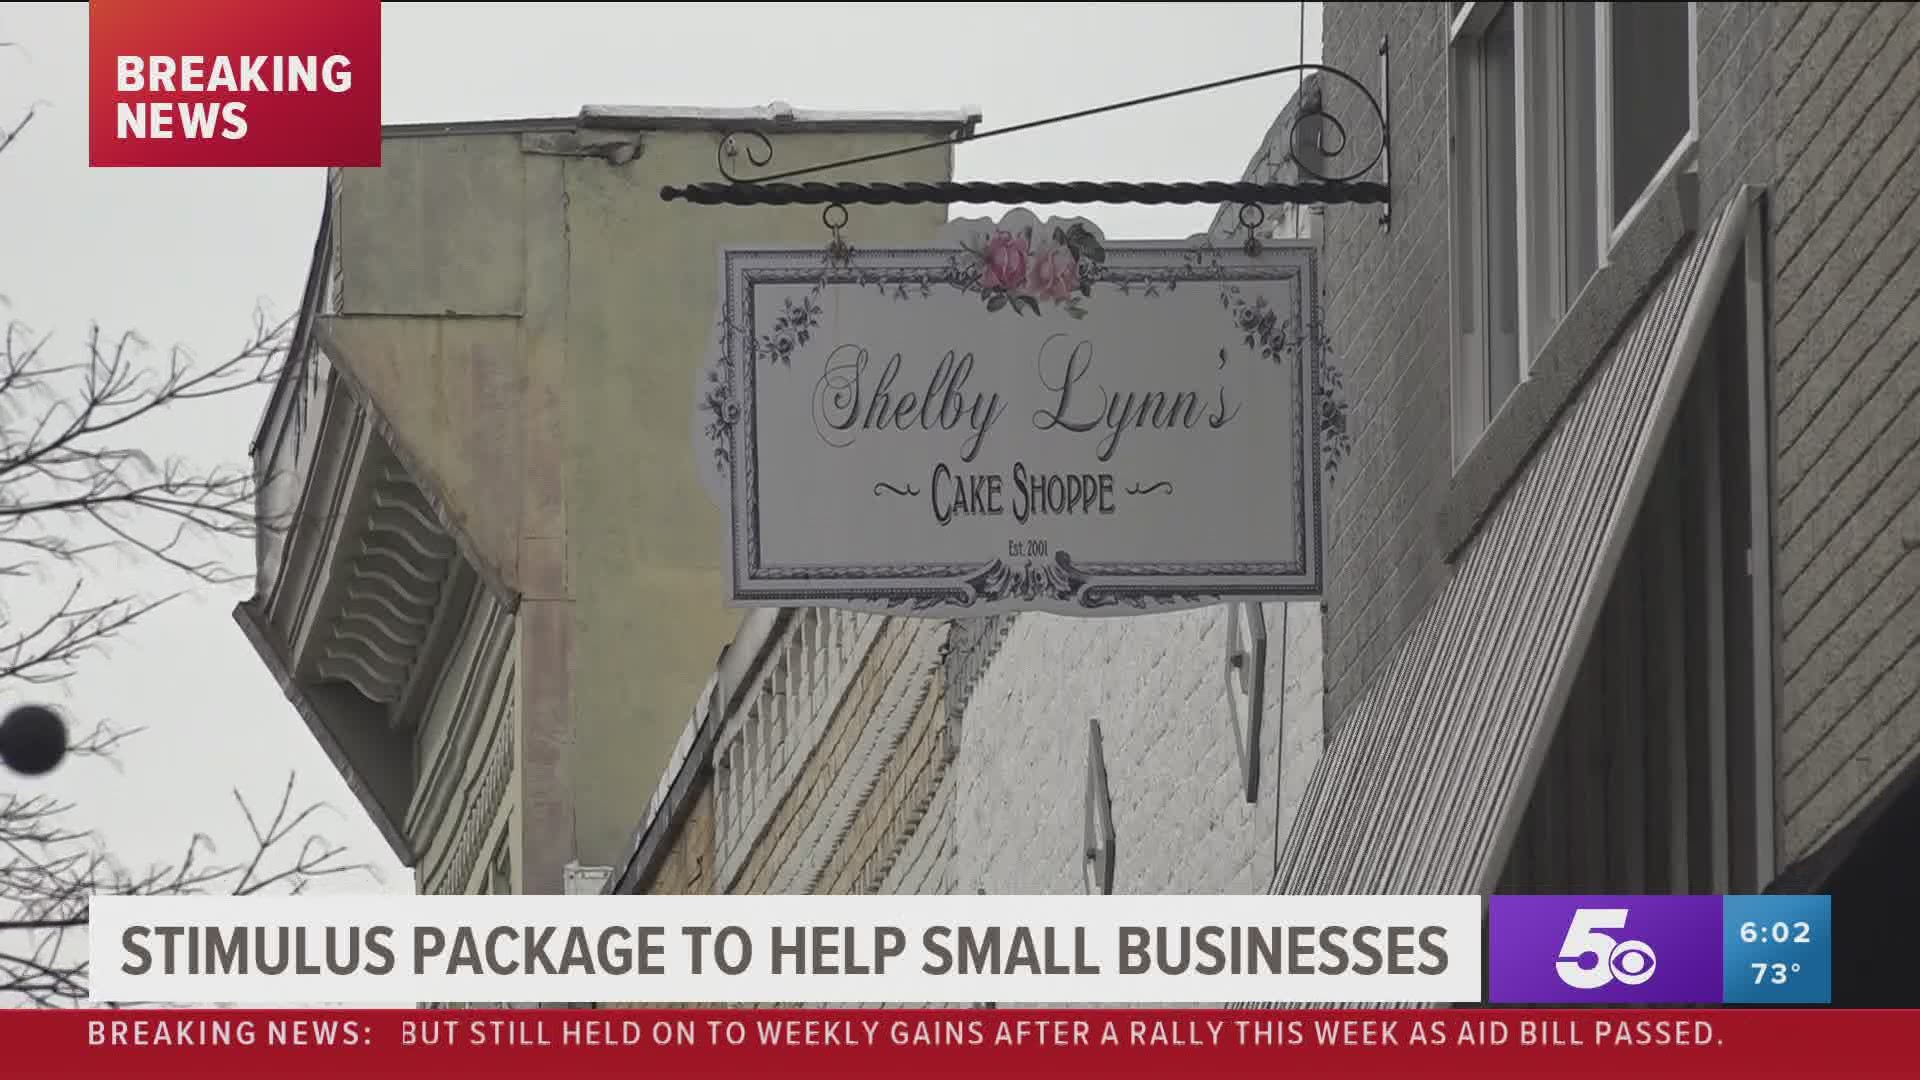 Stimulus package to help small businesses